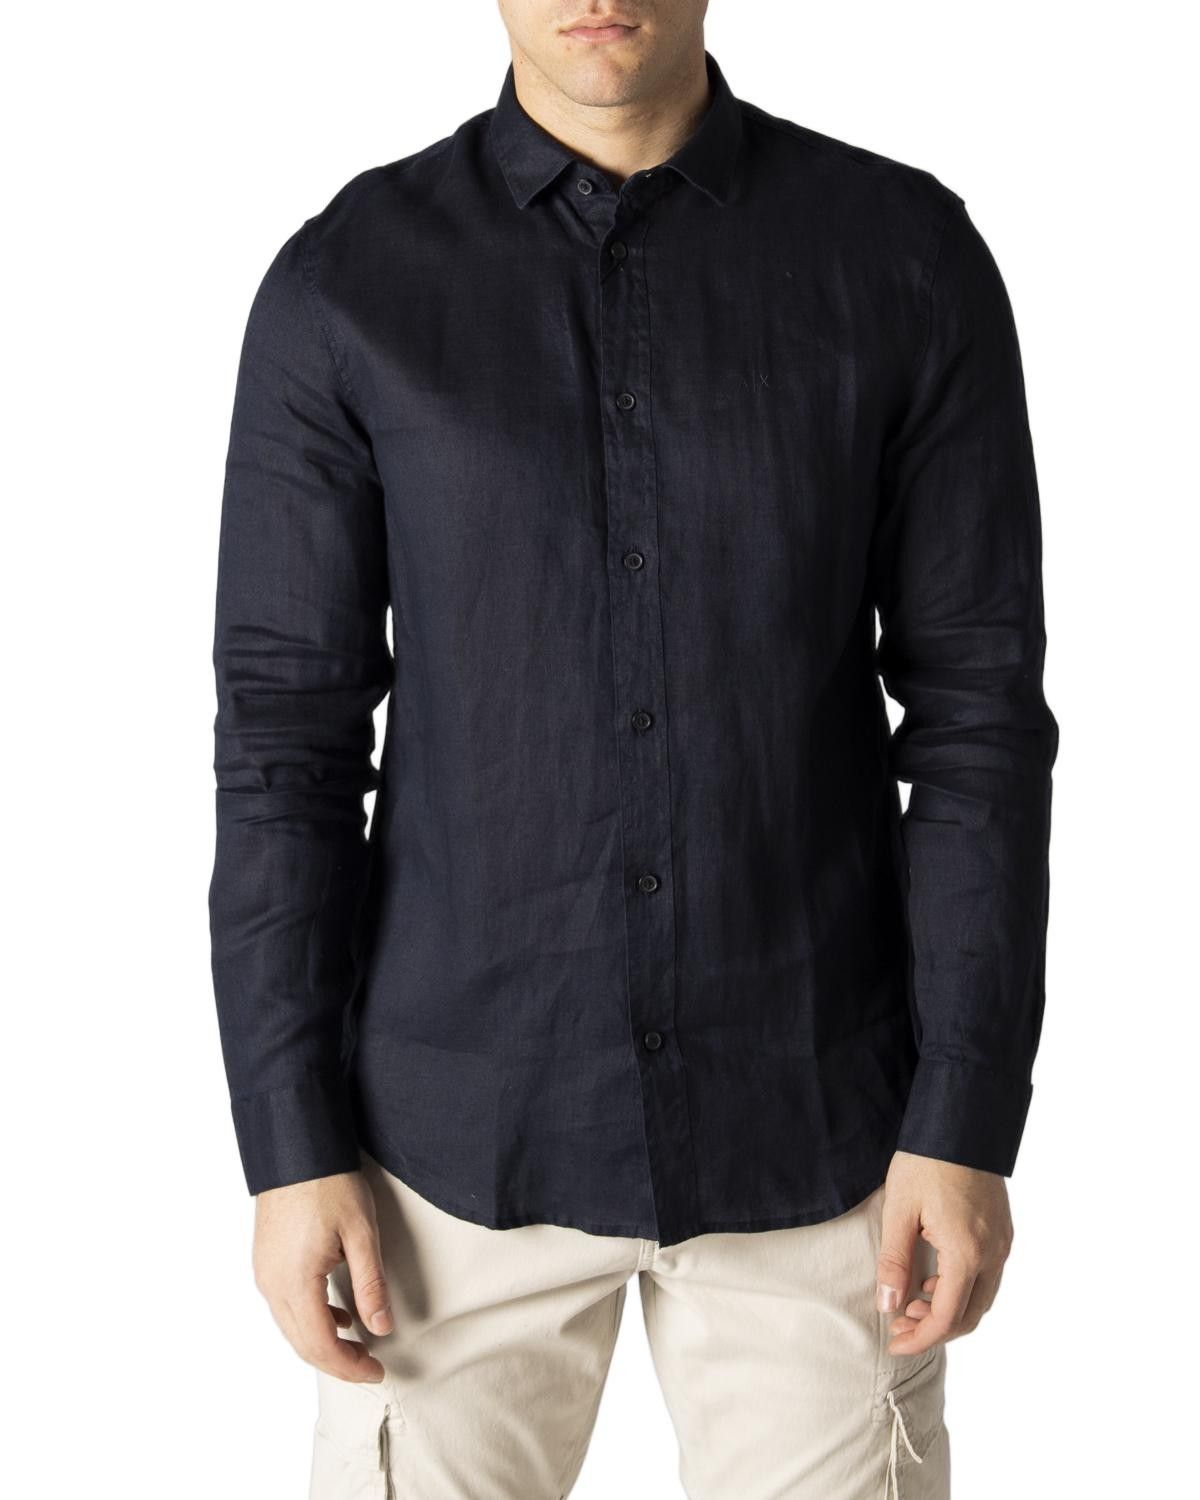 Brand: Armani Exchange
Gender: Men
Type: Shirts
Season: Spring/Summer

PRODUCT DETAIL
• Color: blue
• Pattern: plain
• Fastening: buttons
• Sleeves: long
• Collar: classic

COMPOSITION AND MATERIAL
• Composition: -100% linen 
•  Washing: machine wash at 30°